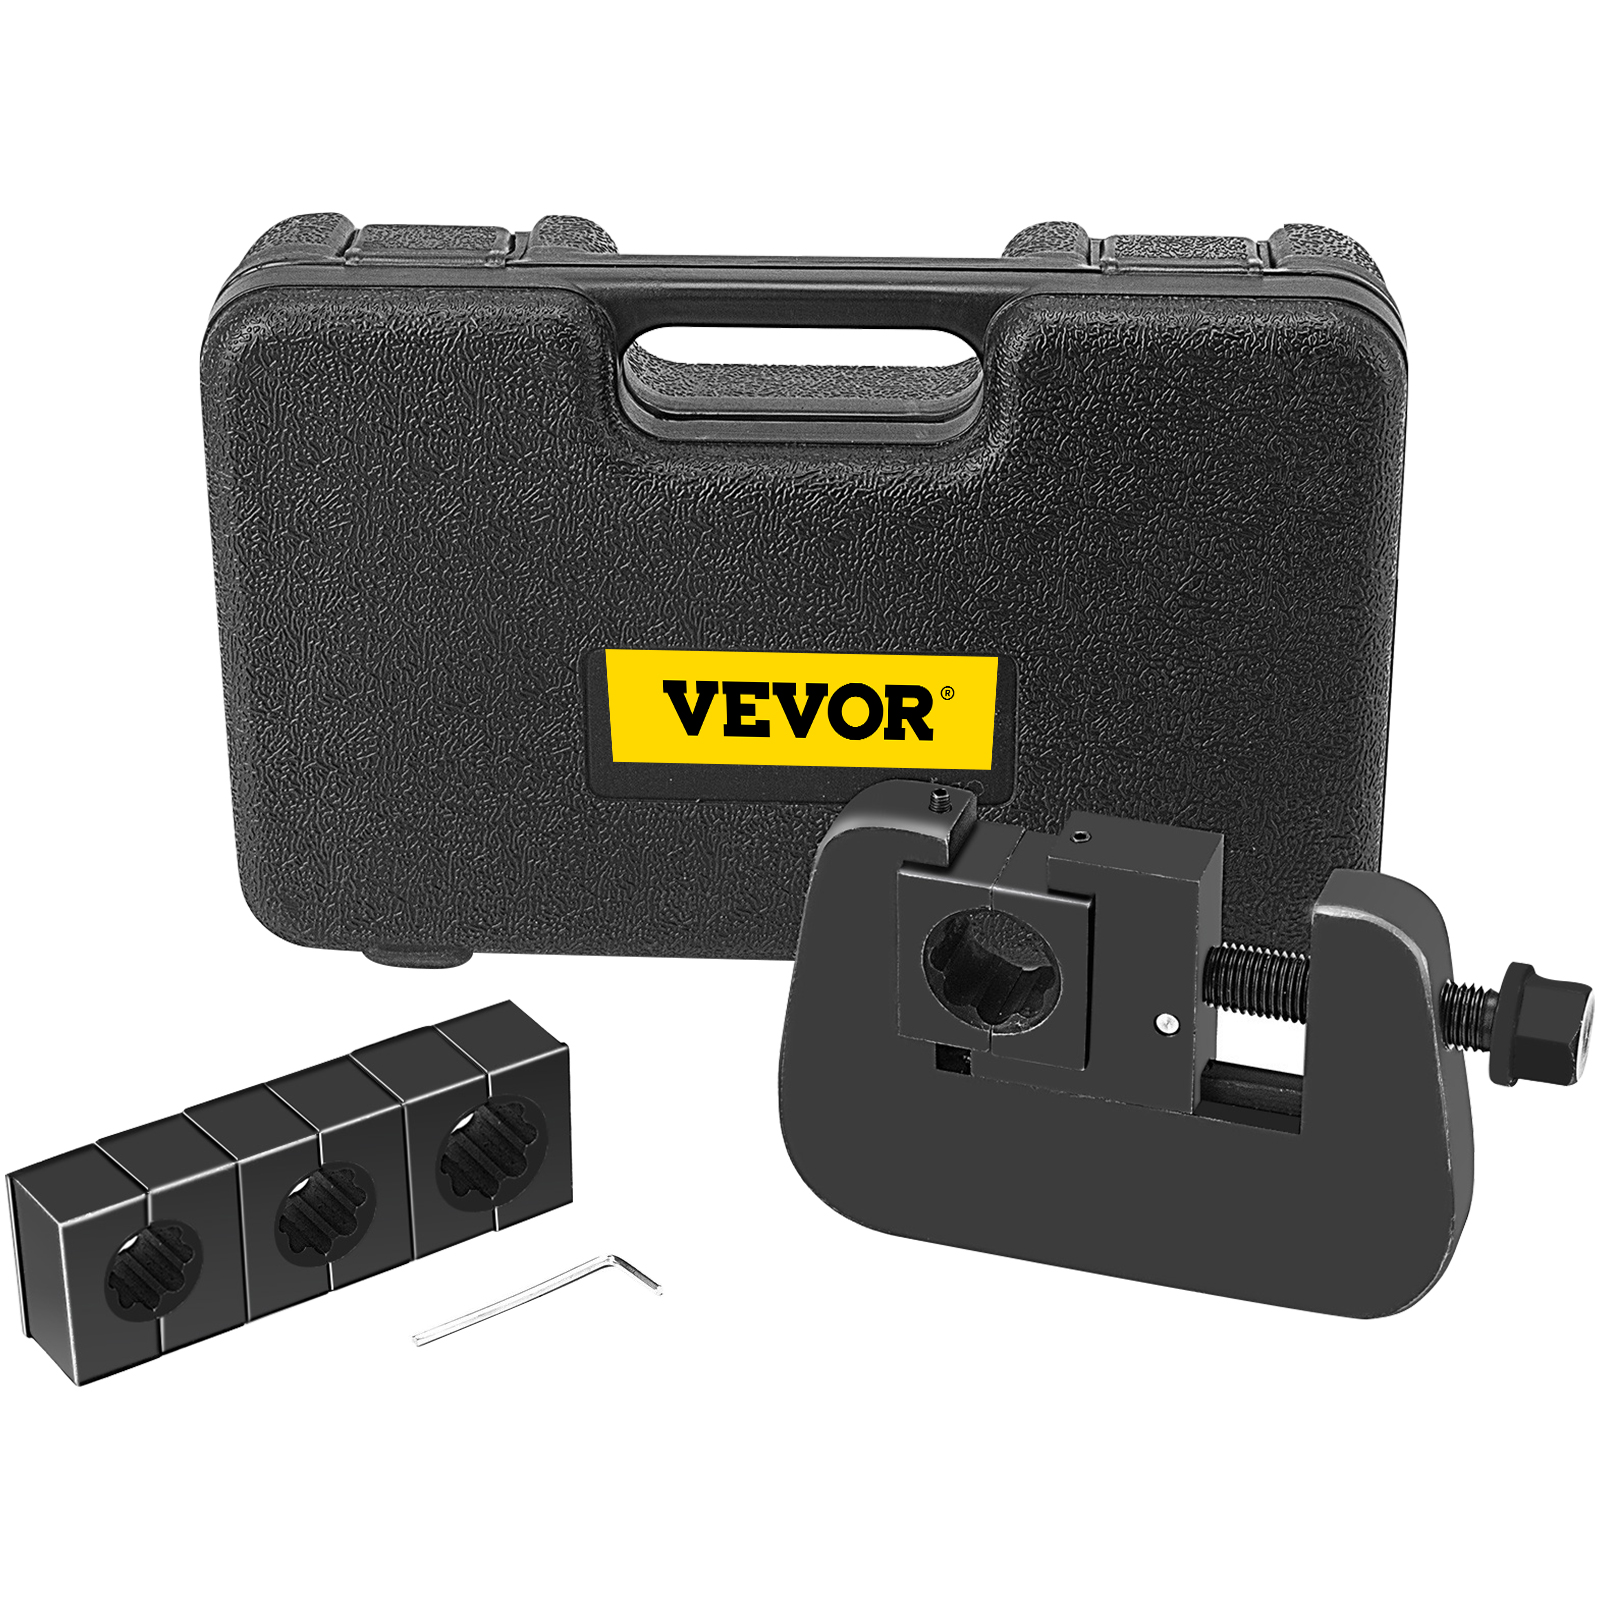 Ag-7843b Manual A/c Hose Crimper Kit Is Applicable For Beadlocking Fittings от Vevor Many GEOs